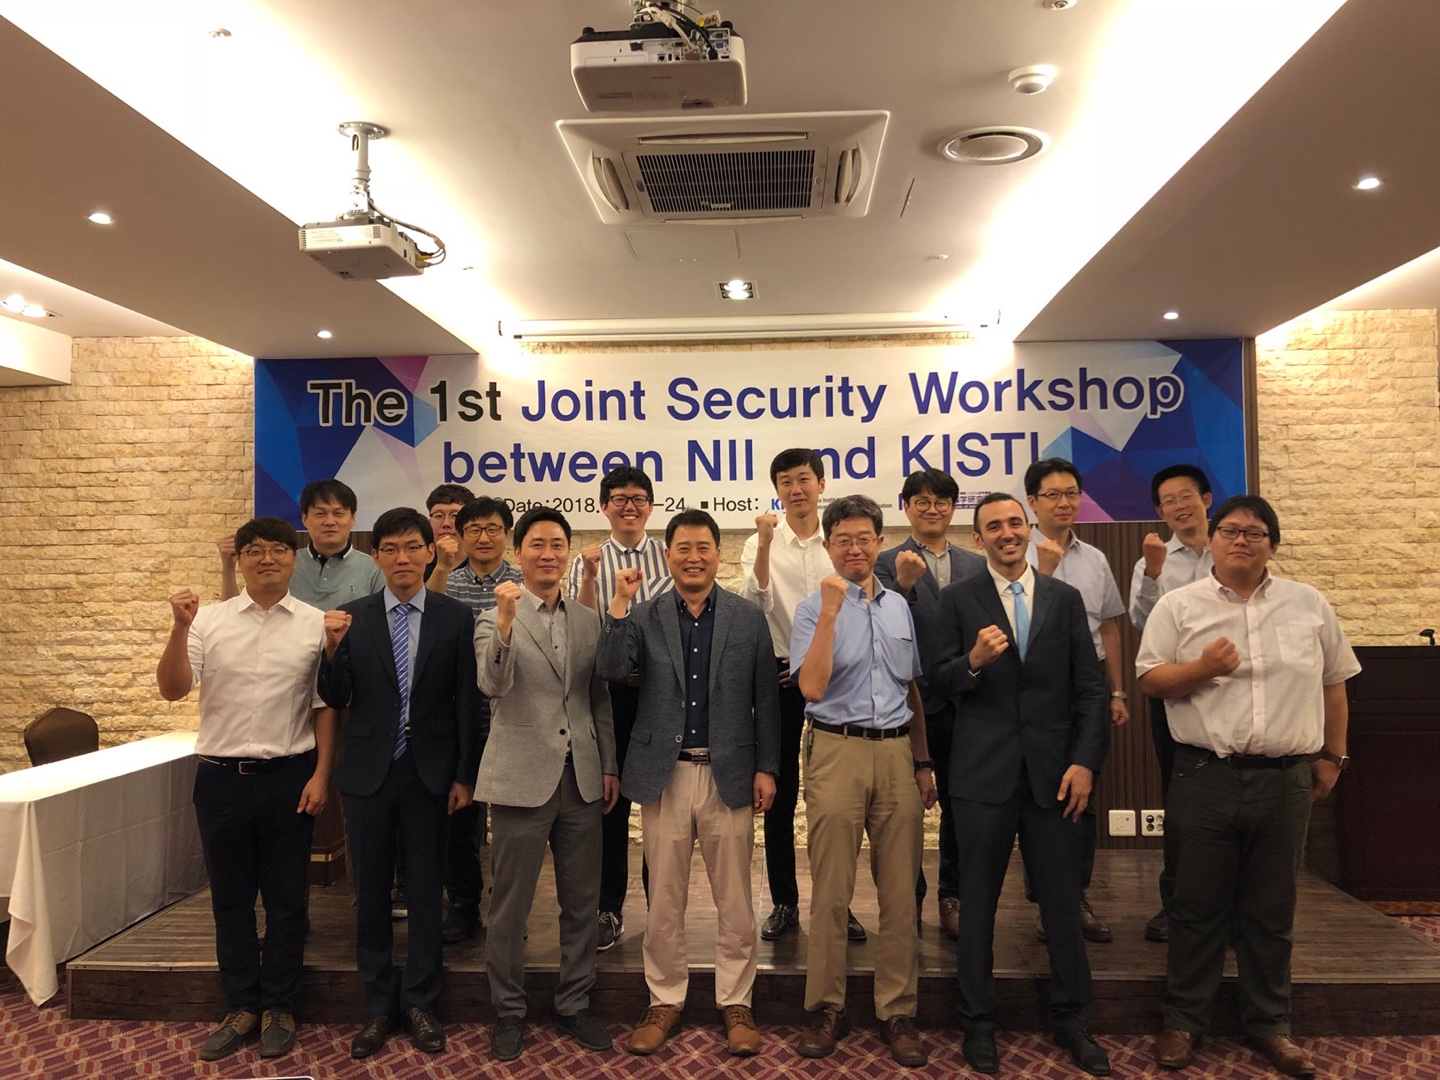 The 1st Joint Security Workshop between NII and KISTI